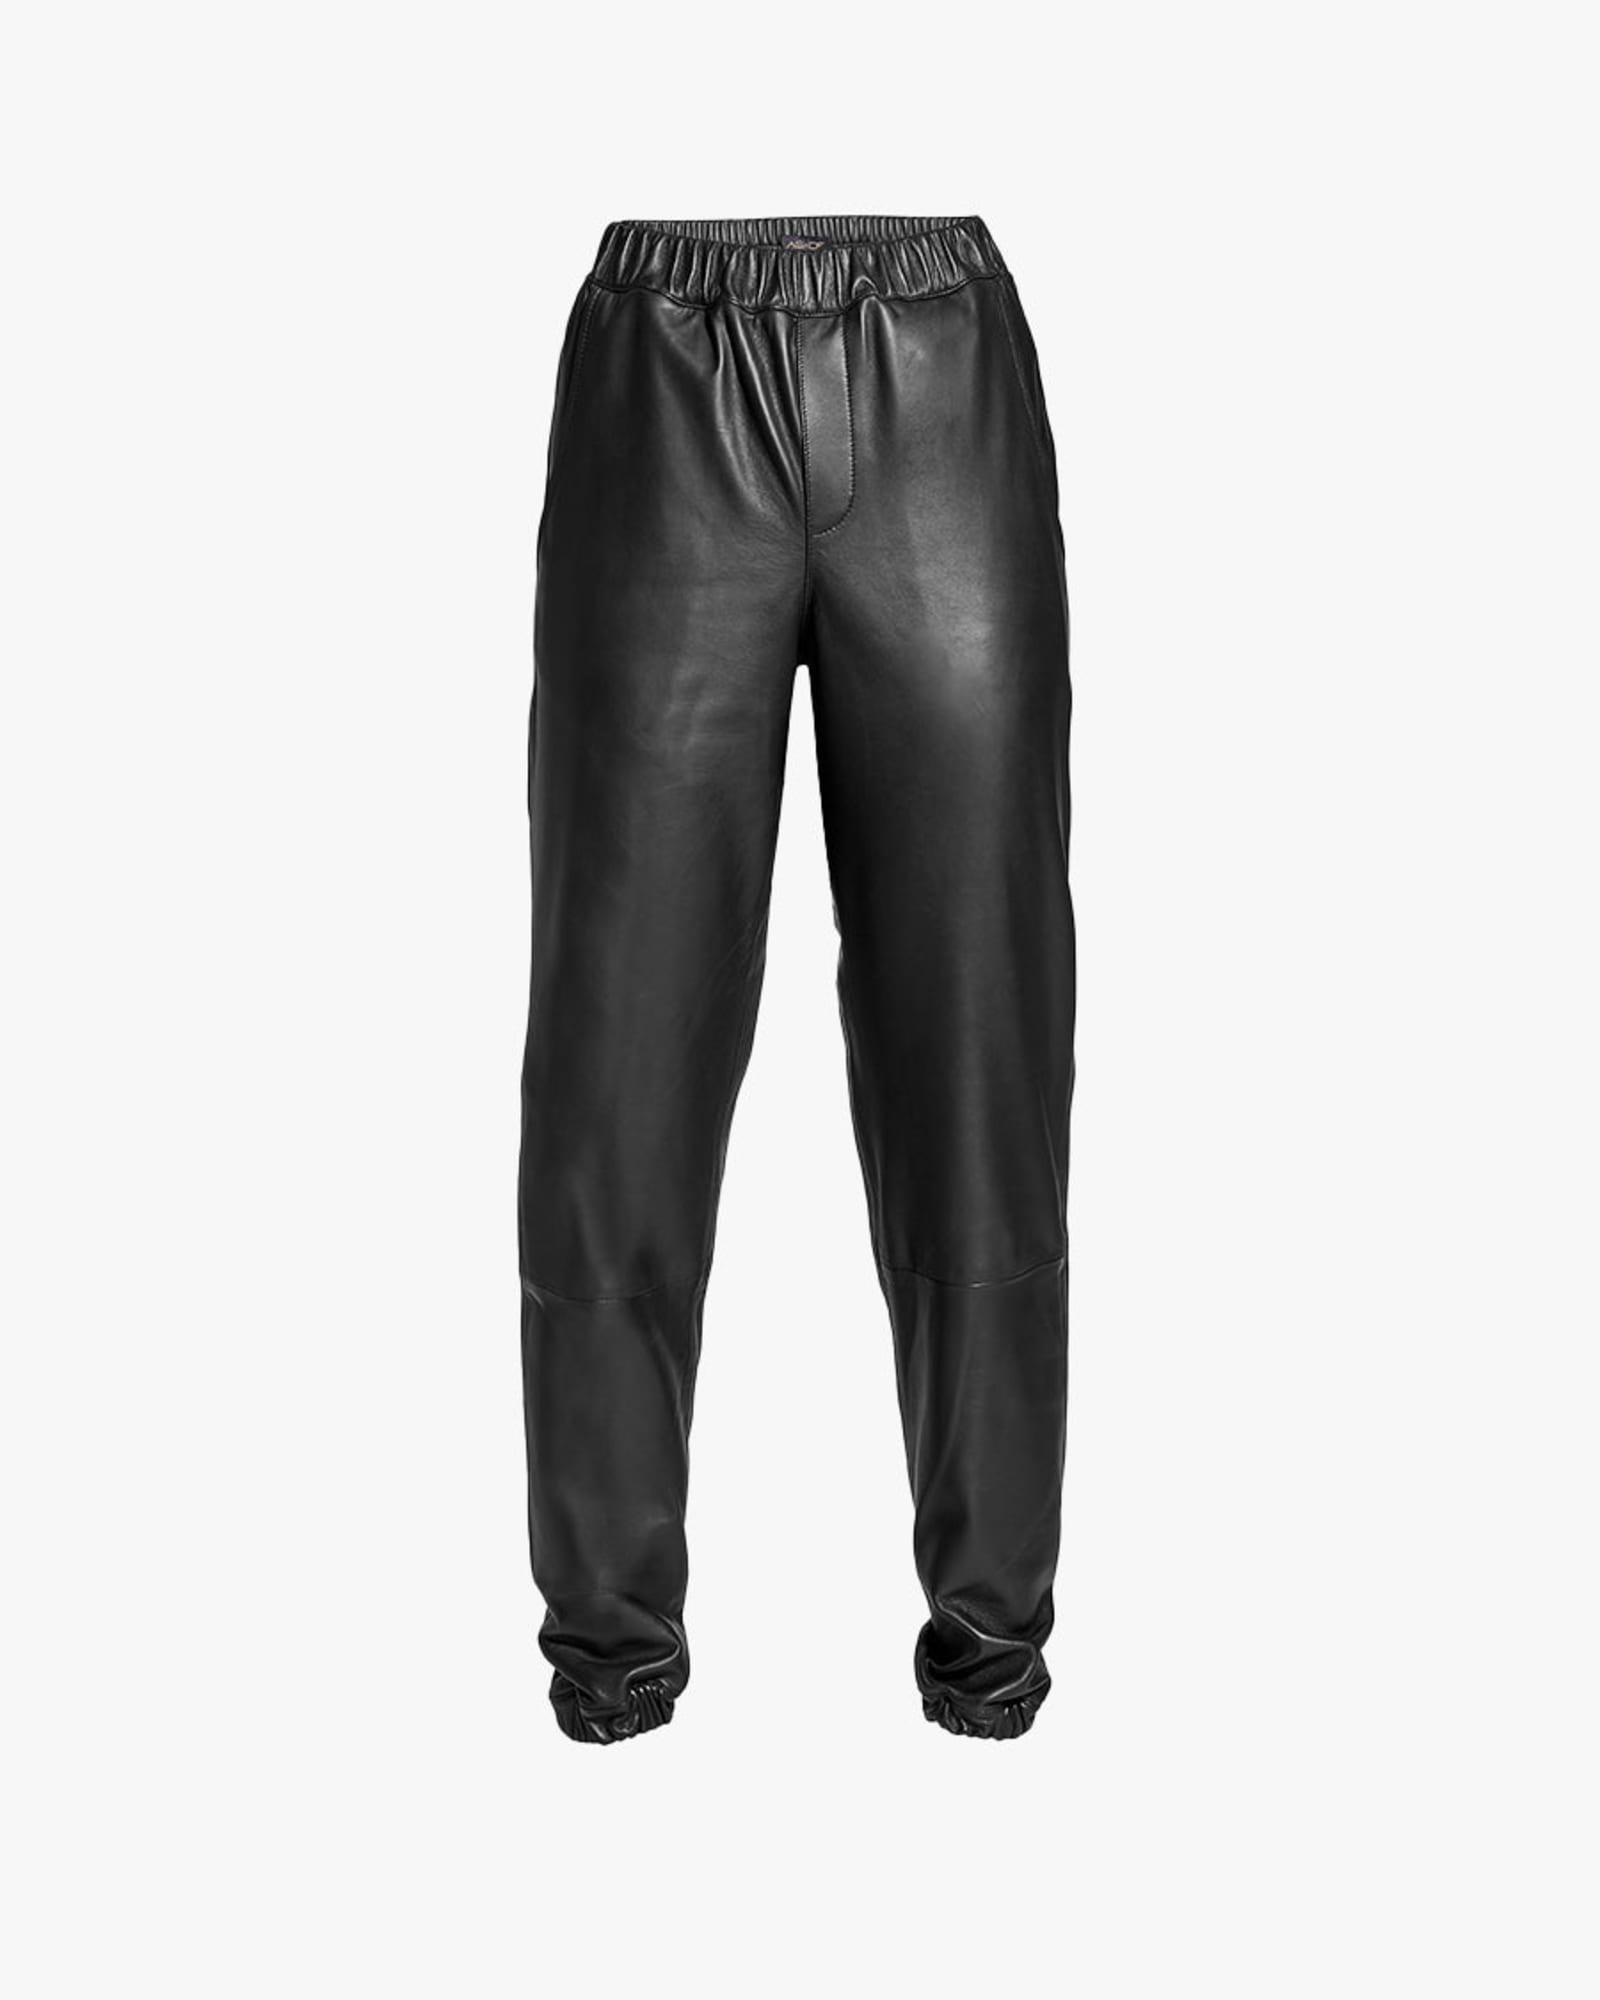 THE UPCYCLED LEATHER JOGGERS | Black